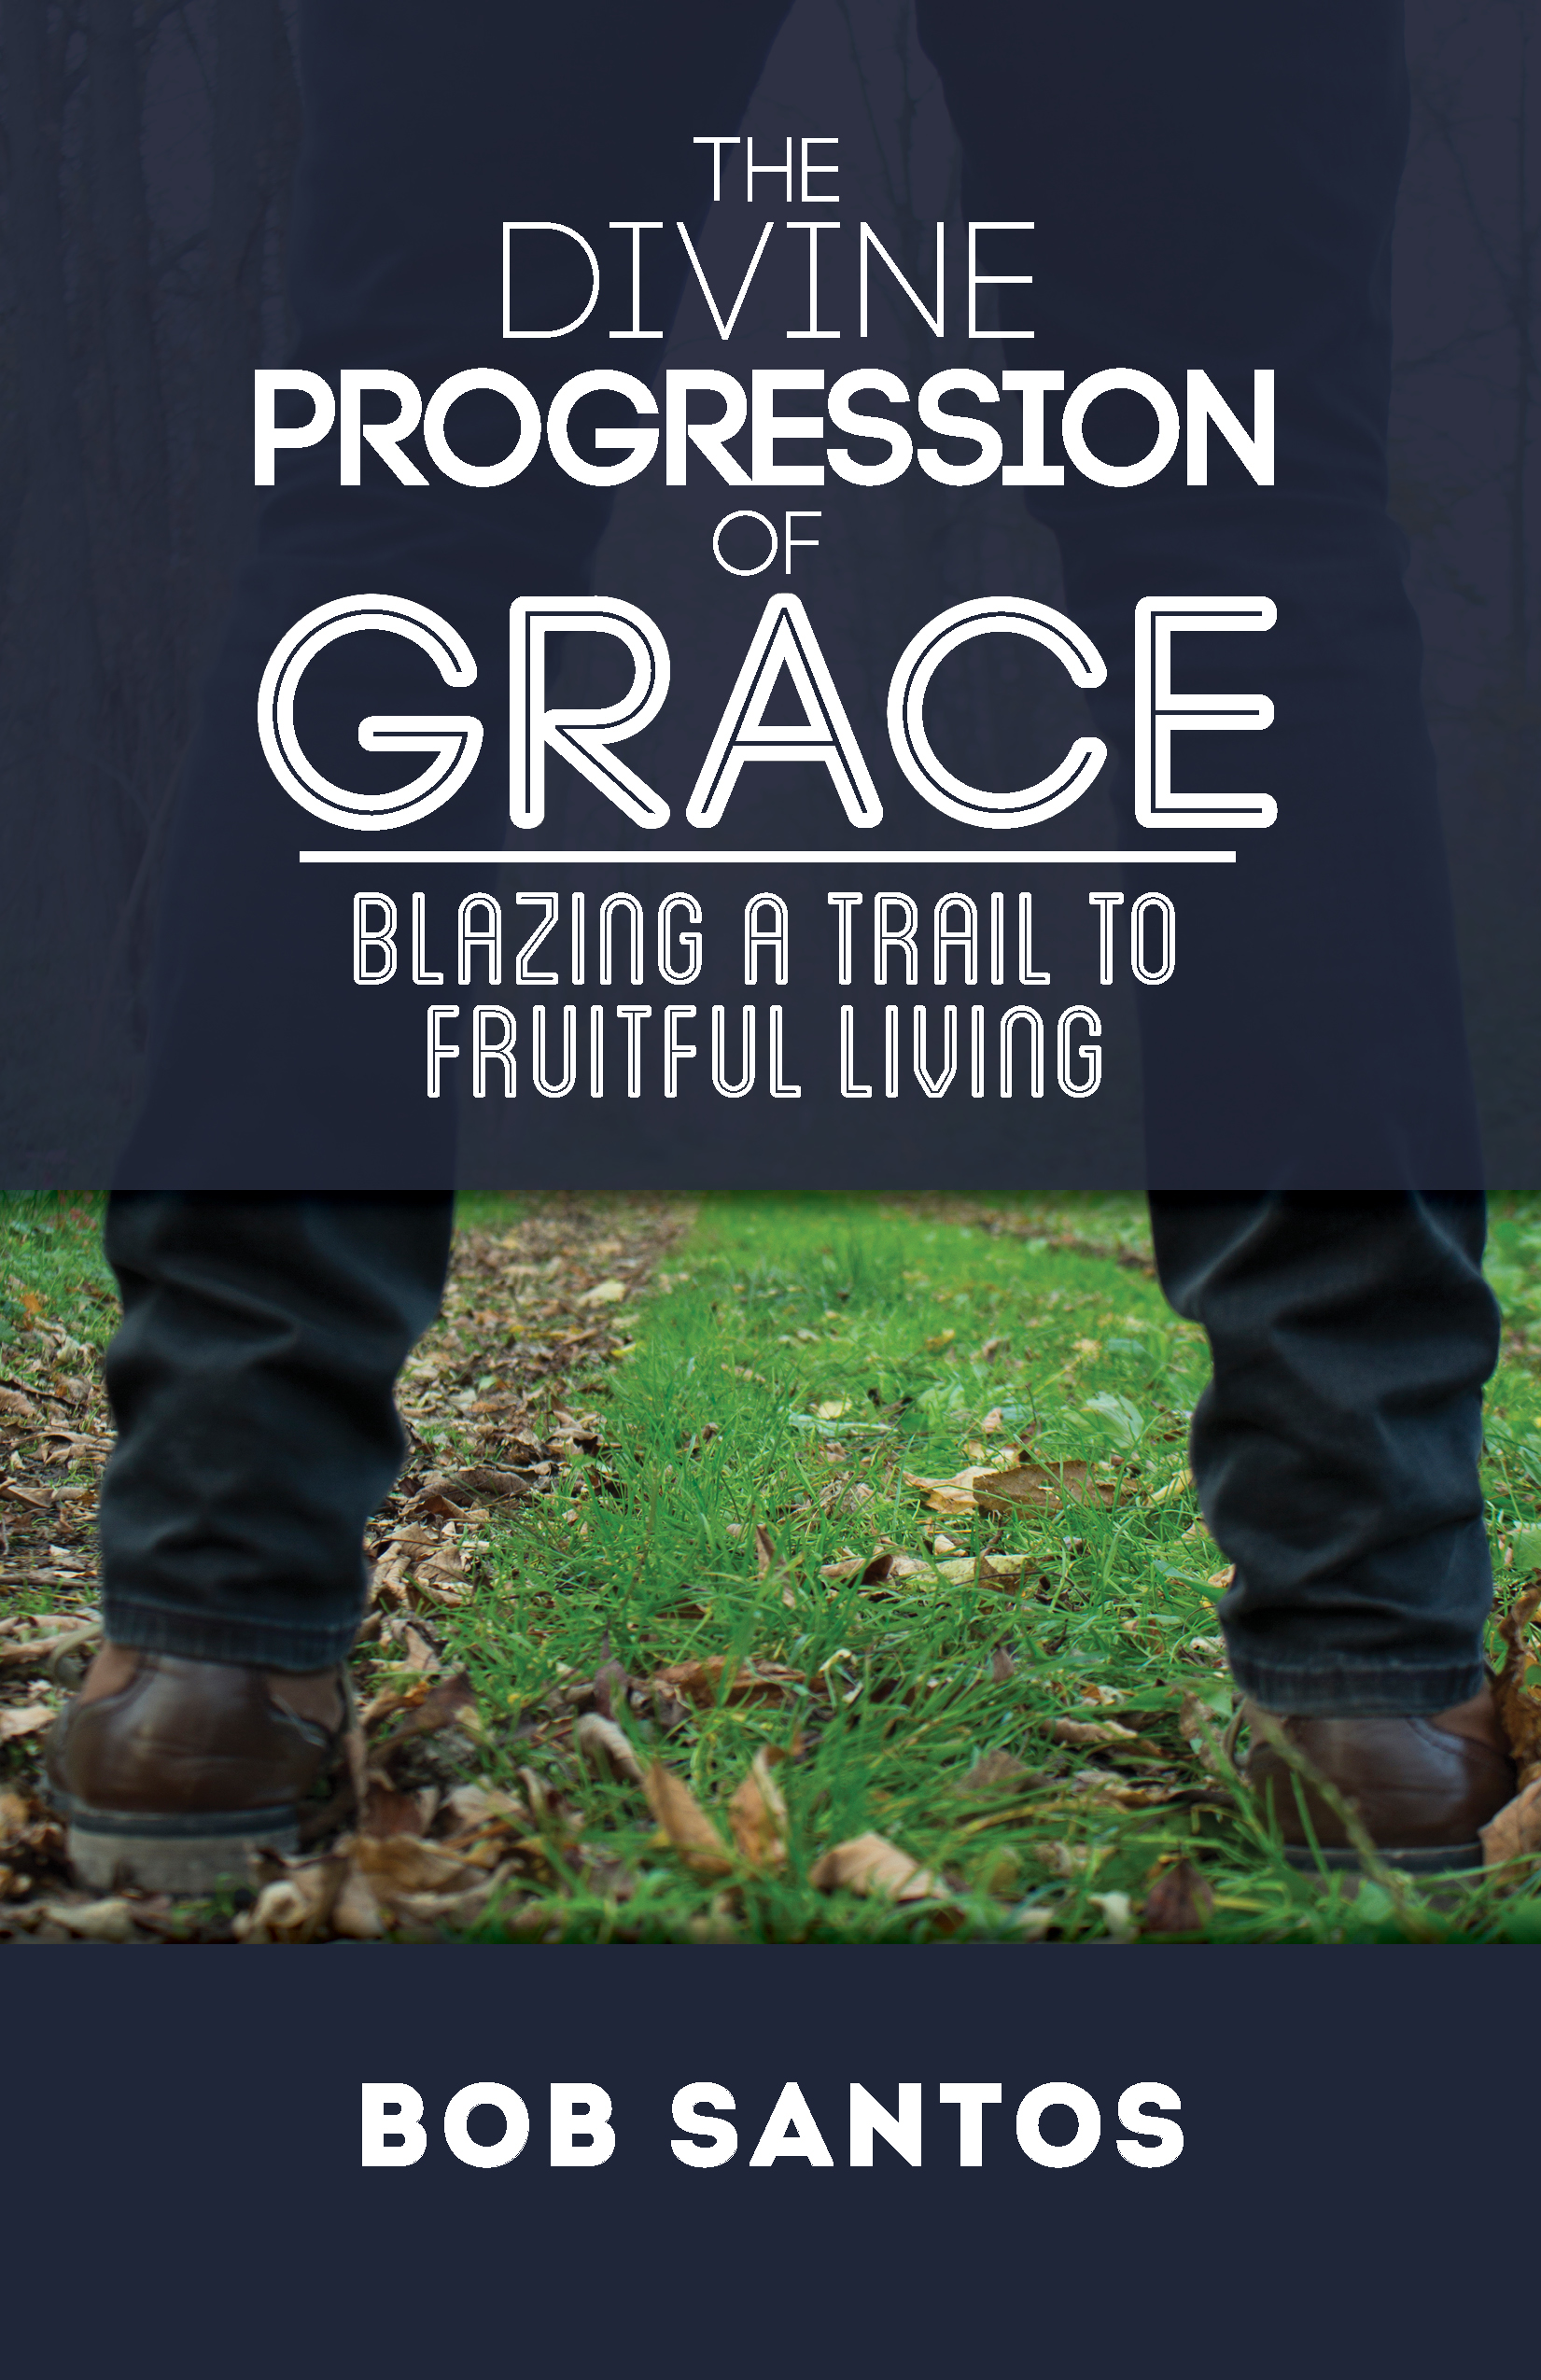 The Divine Progression of Grace: Blazing a Trail to Fruitful Living